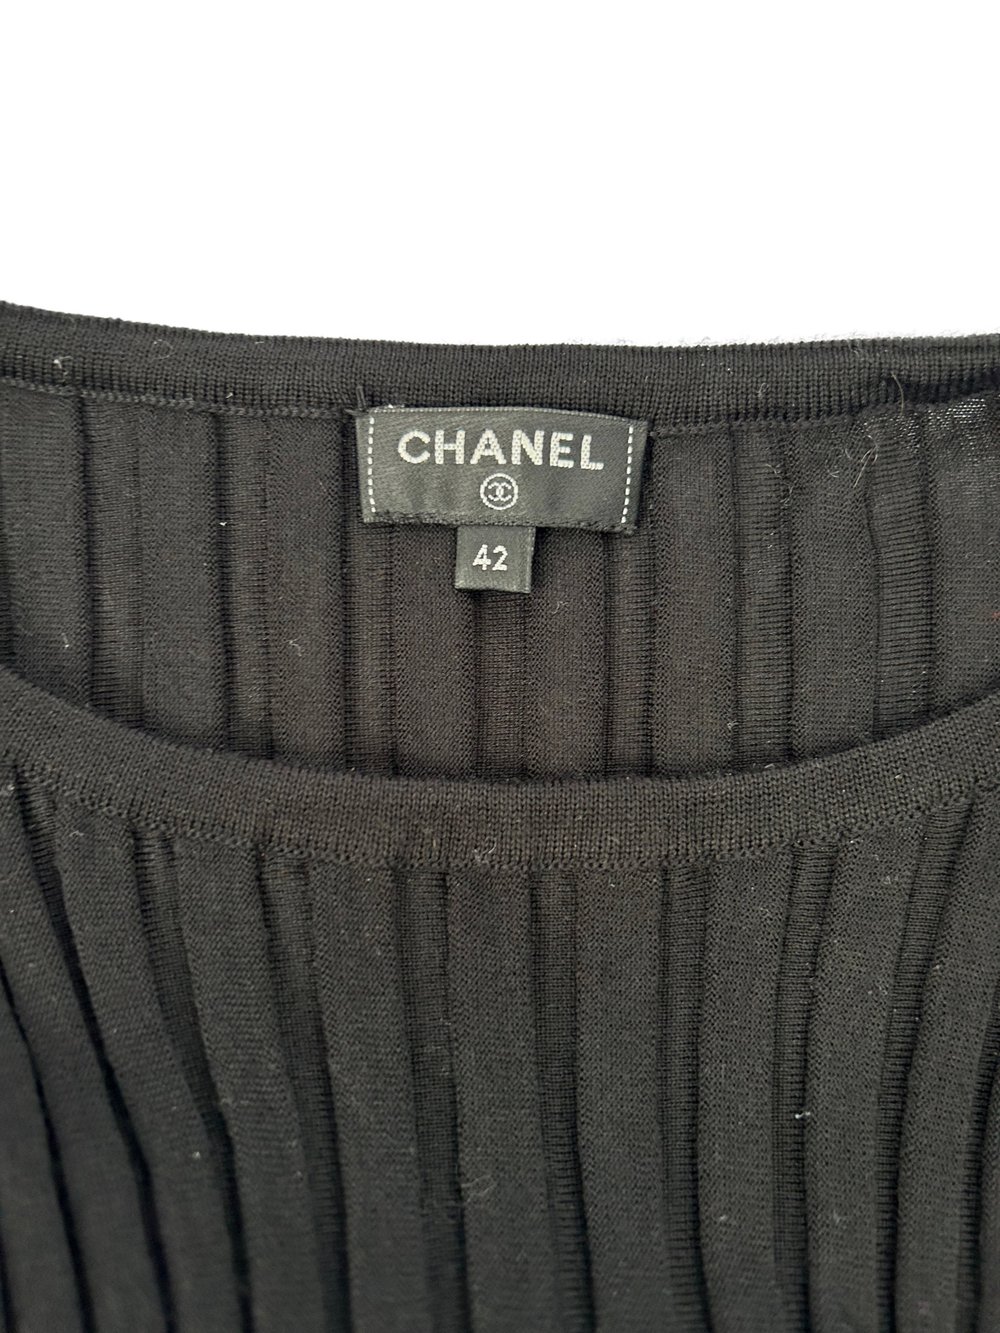 Chanel Yellow Tweed Jacket Size 38 — Socialite Auctions